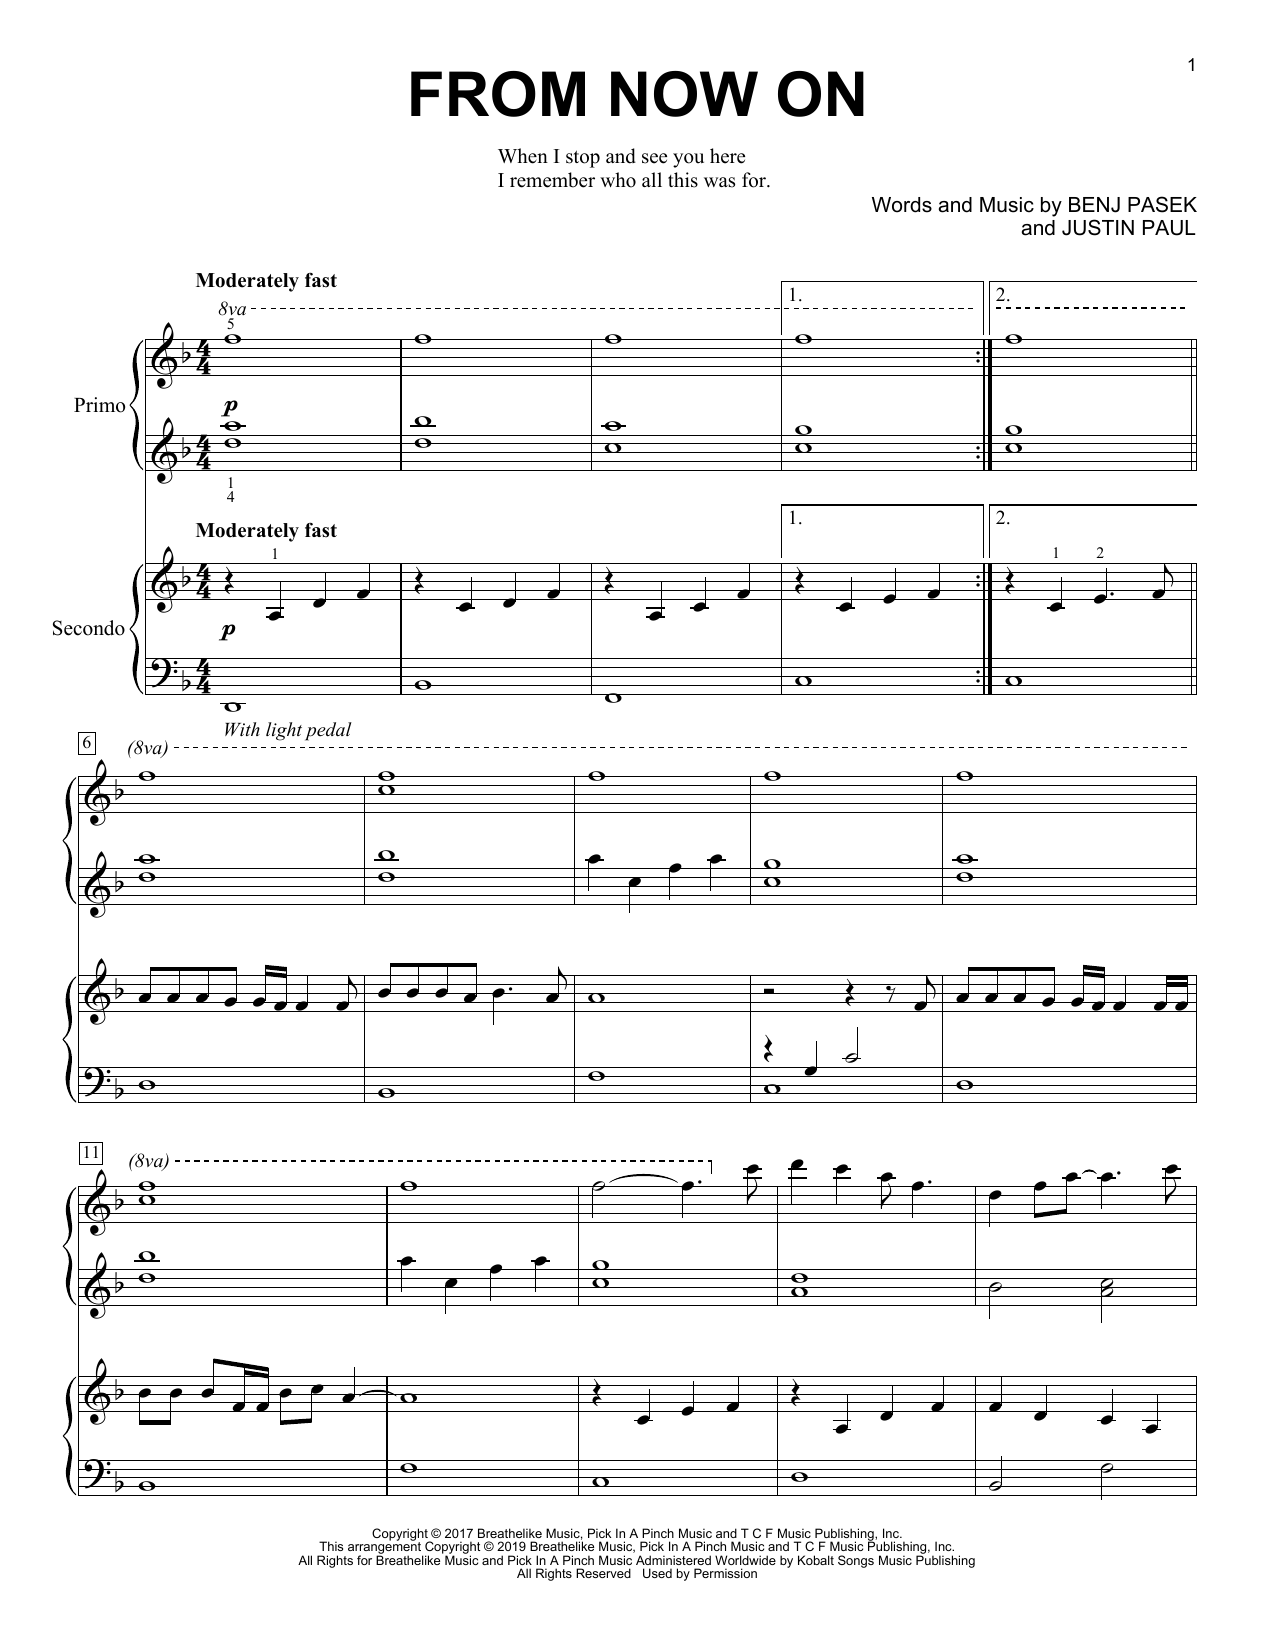 Download Pasek & Paul From Now On (from The Greatest Showman) Sheet Music